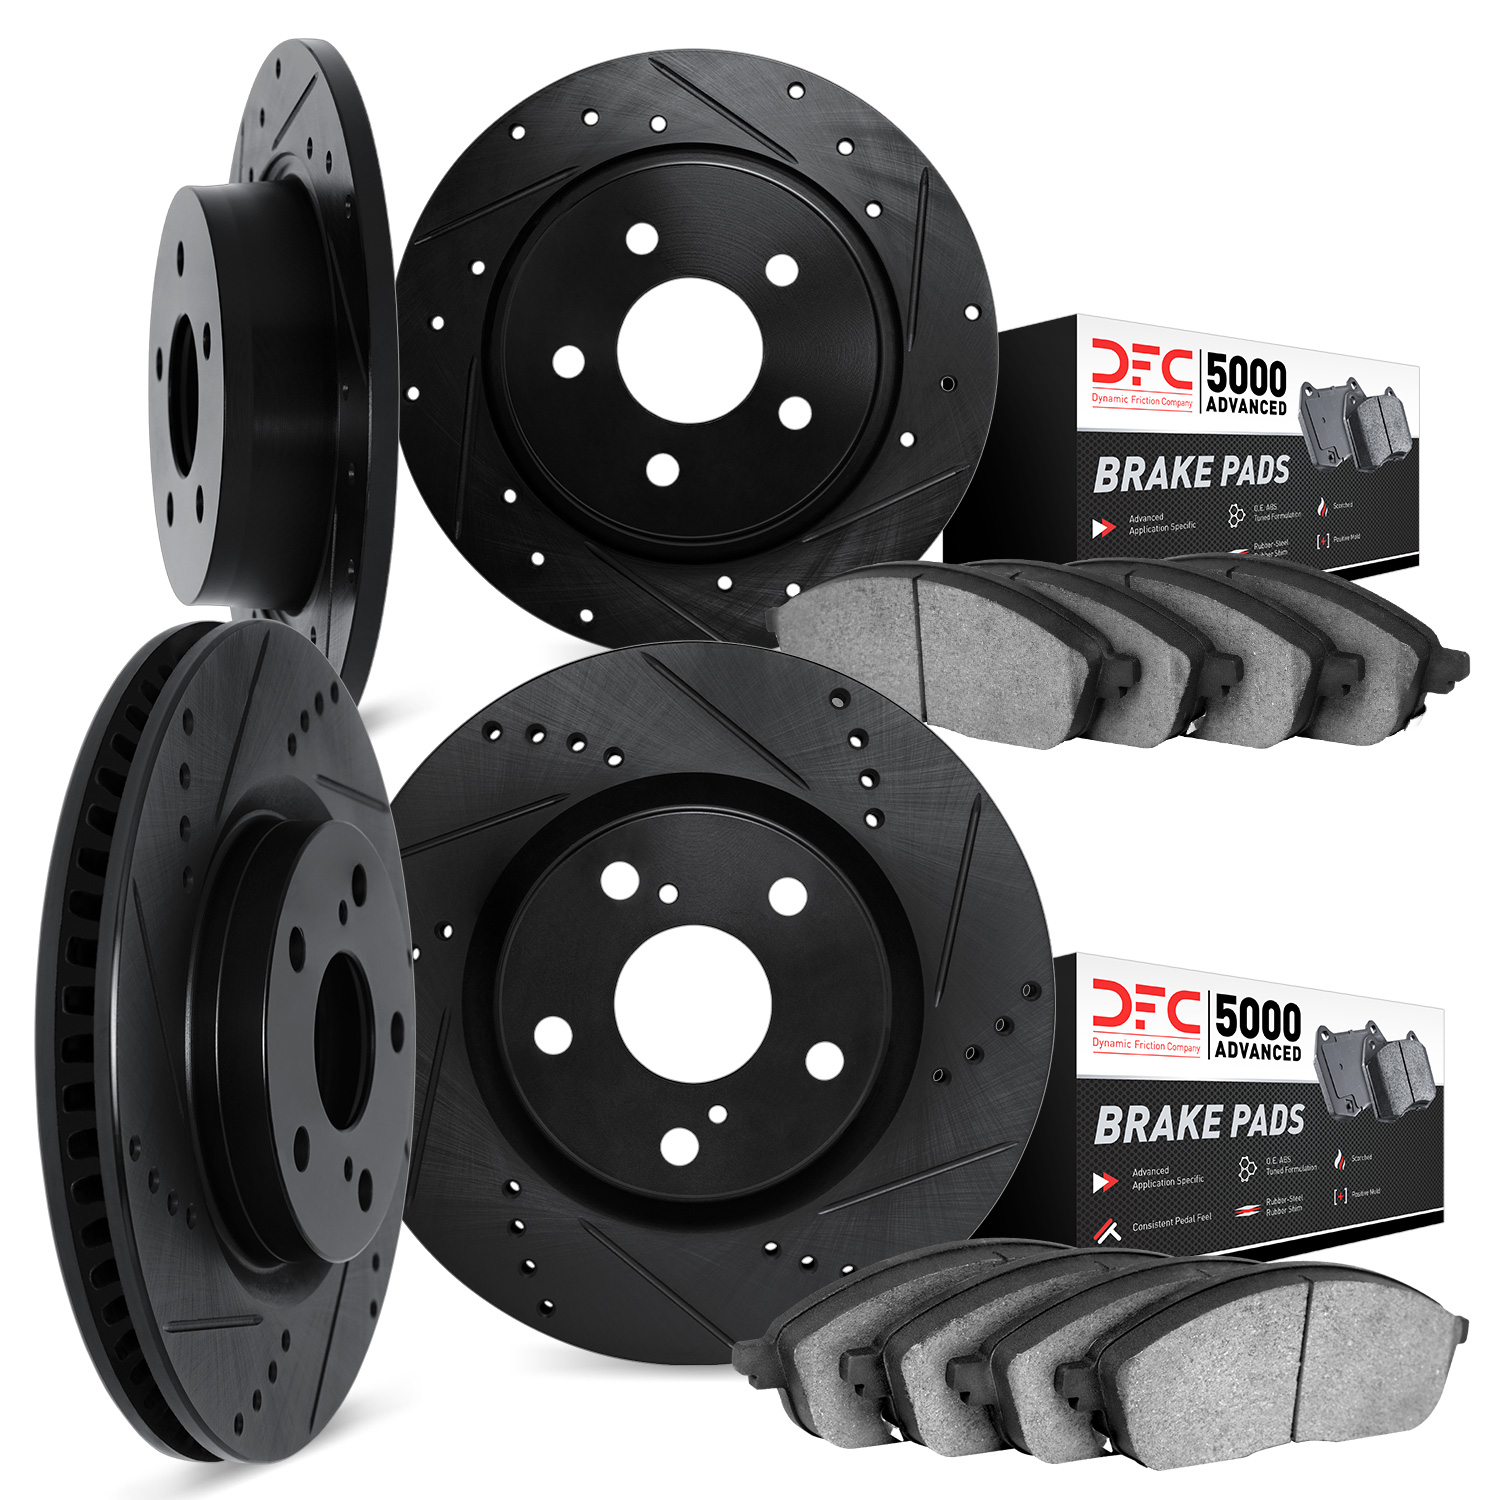 8504-39023 Drilled/Slotted Brake Rotors w/5000 Advanced Brake Pads Kit [Black], Fits Select Mopar, Position: Front and Rear